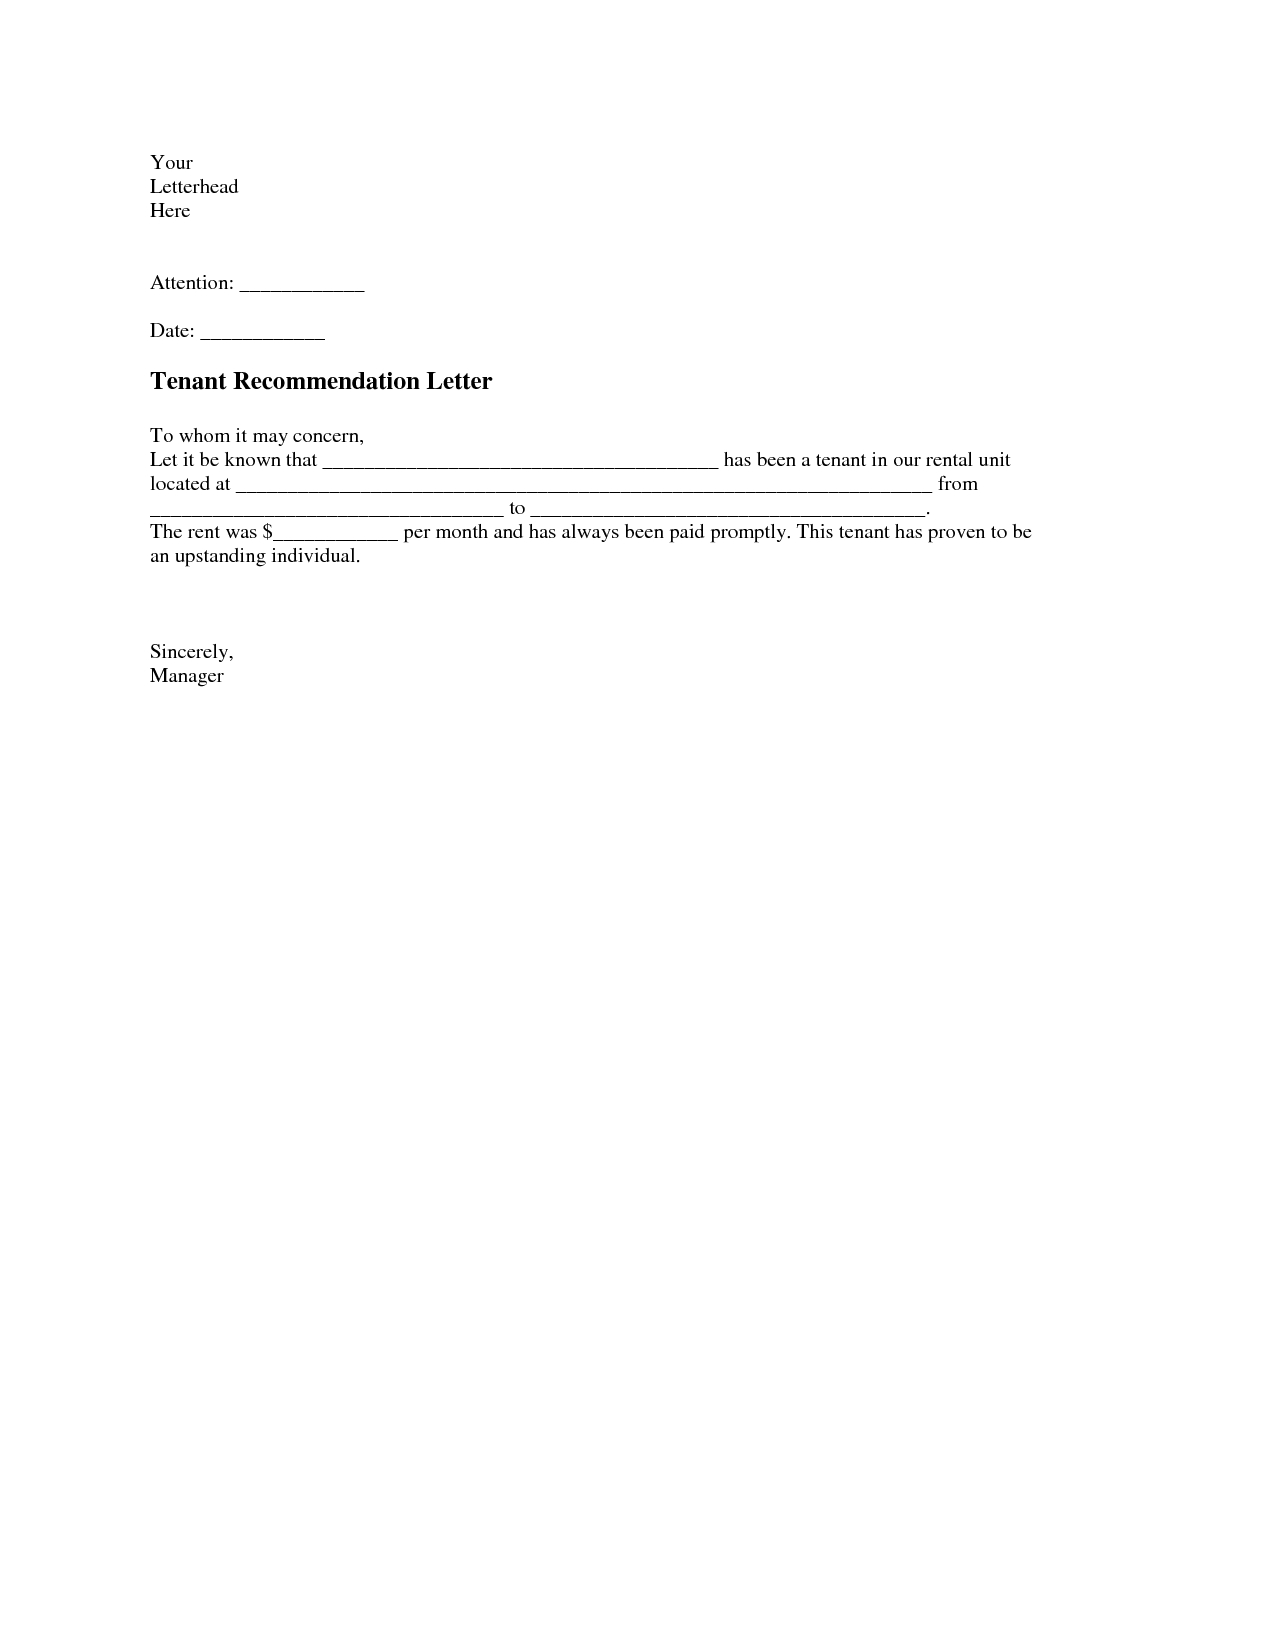 Tenant Recommendation Letter A Tenant Recommendation pertaining to dimensions 1275 X 1650